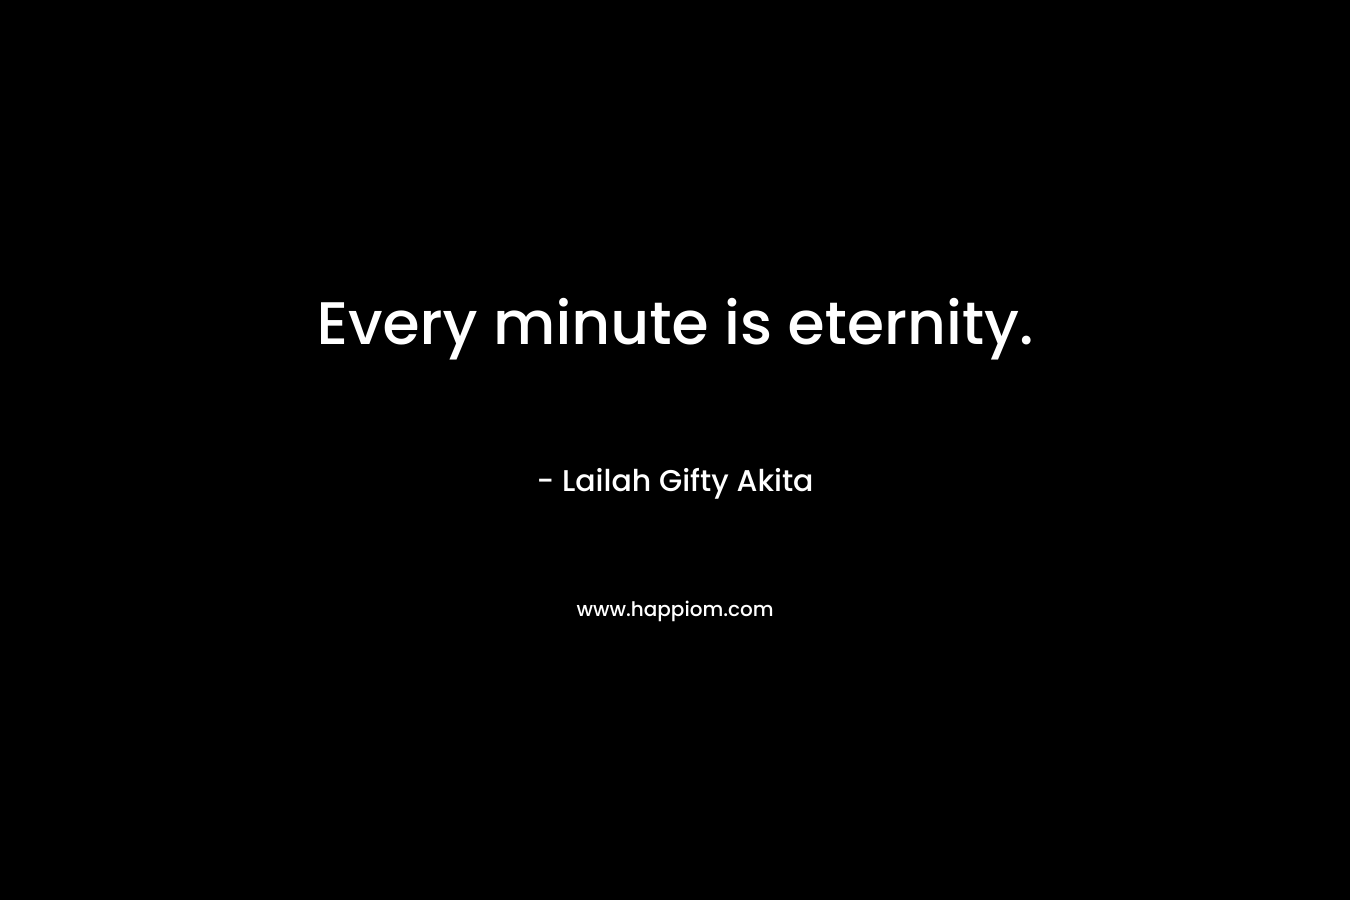 Every minute is eternity. – Lailah Gifty Akita